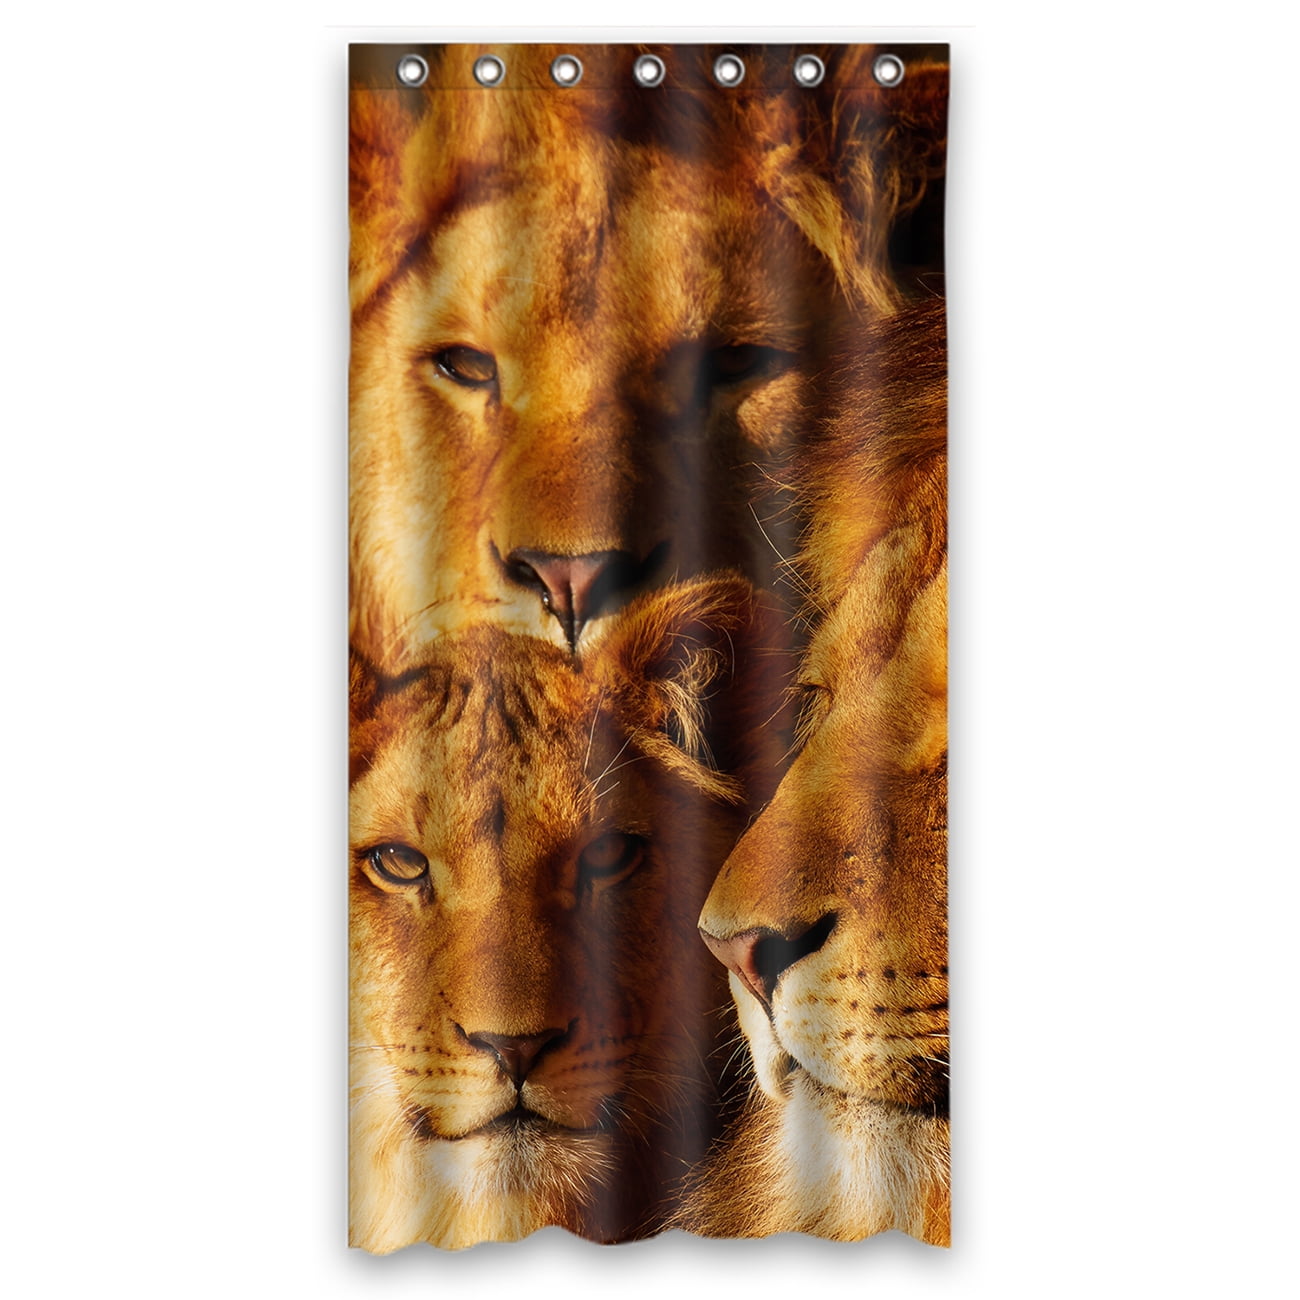 Details about   Sketch African Wild Animals Lion Elephant Waterproof Fabric Shower Curtain Set 